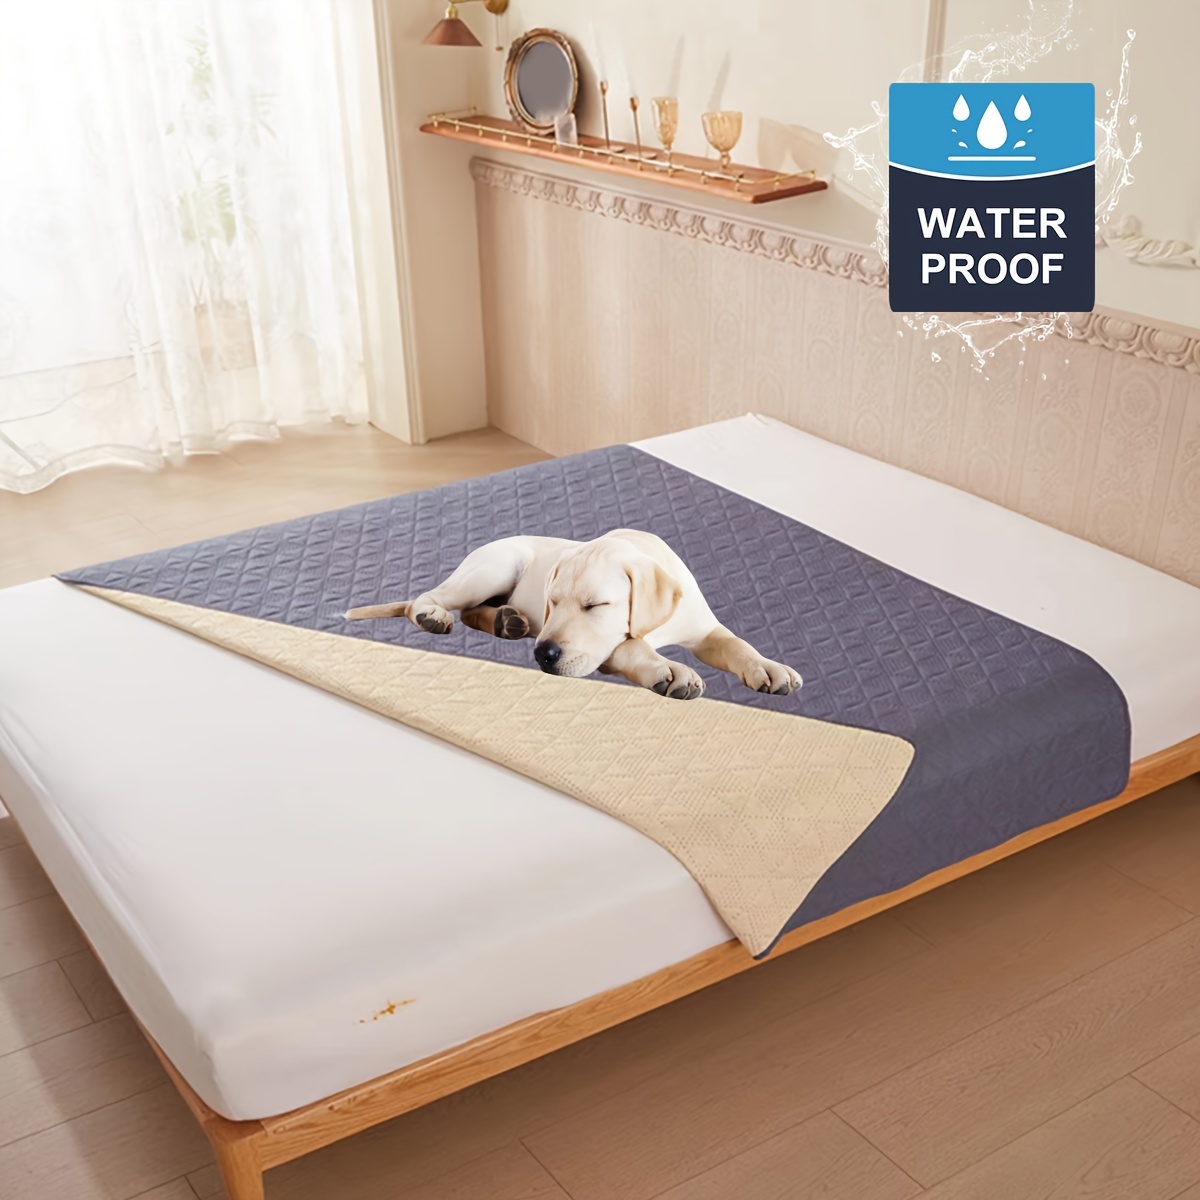 Waterproof Bed Cover for Dog and Cats,Pet Hair Resistant Bed Sheet Cover,  Protective Bed Liner Cover with 100% Waterproof Breathable Thin Fabric (Cal